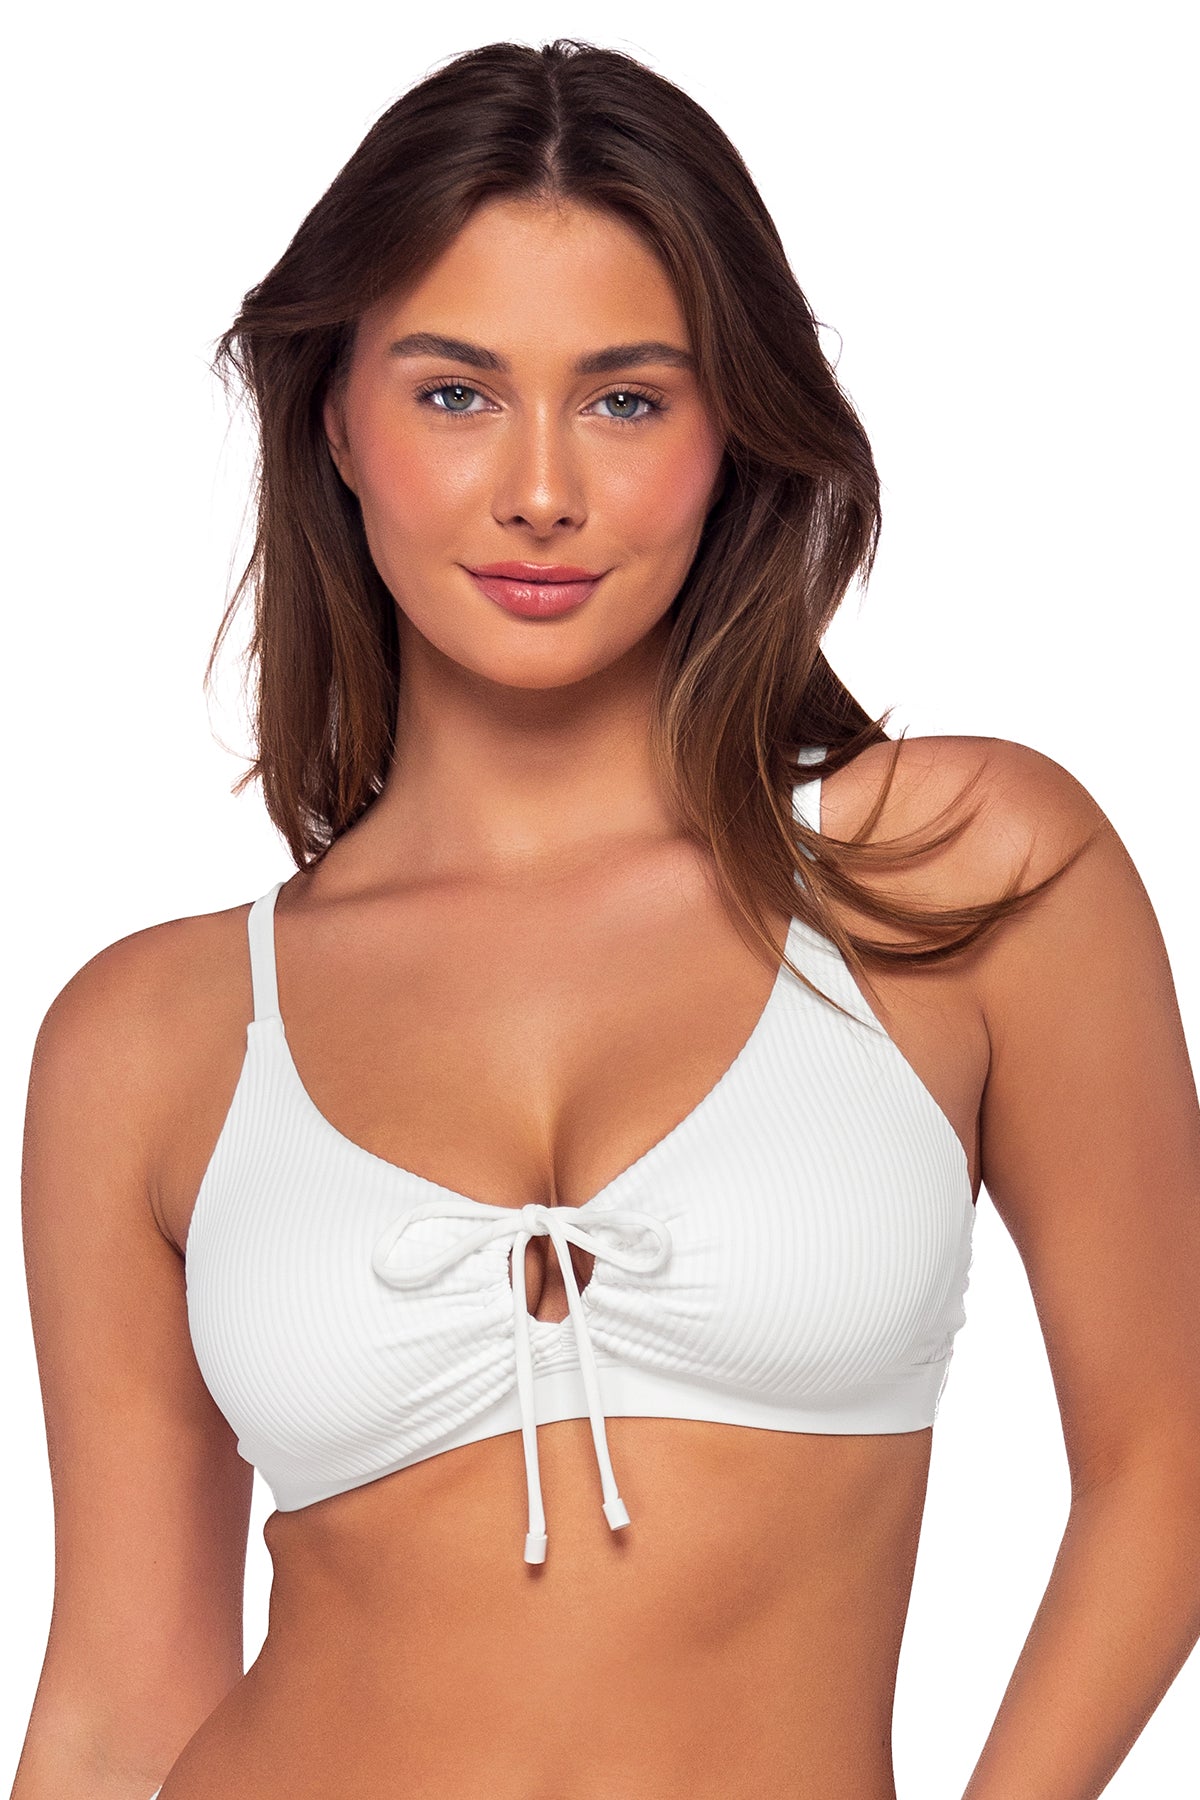 Blossom Sports Bra Full coverage and comes with diagonal cut cups- White